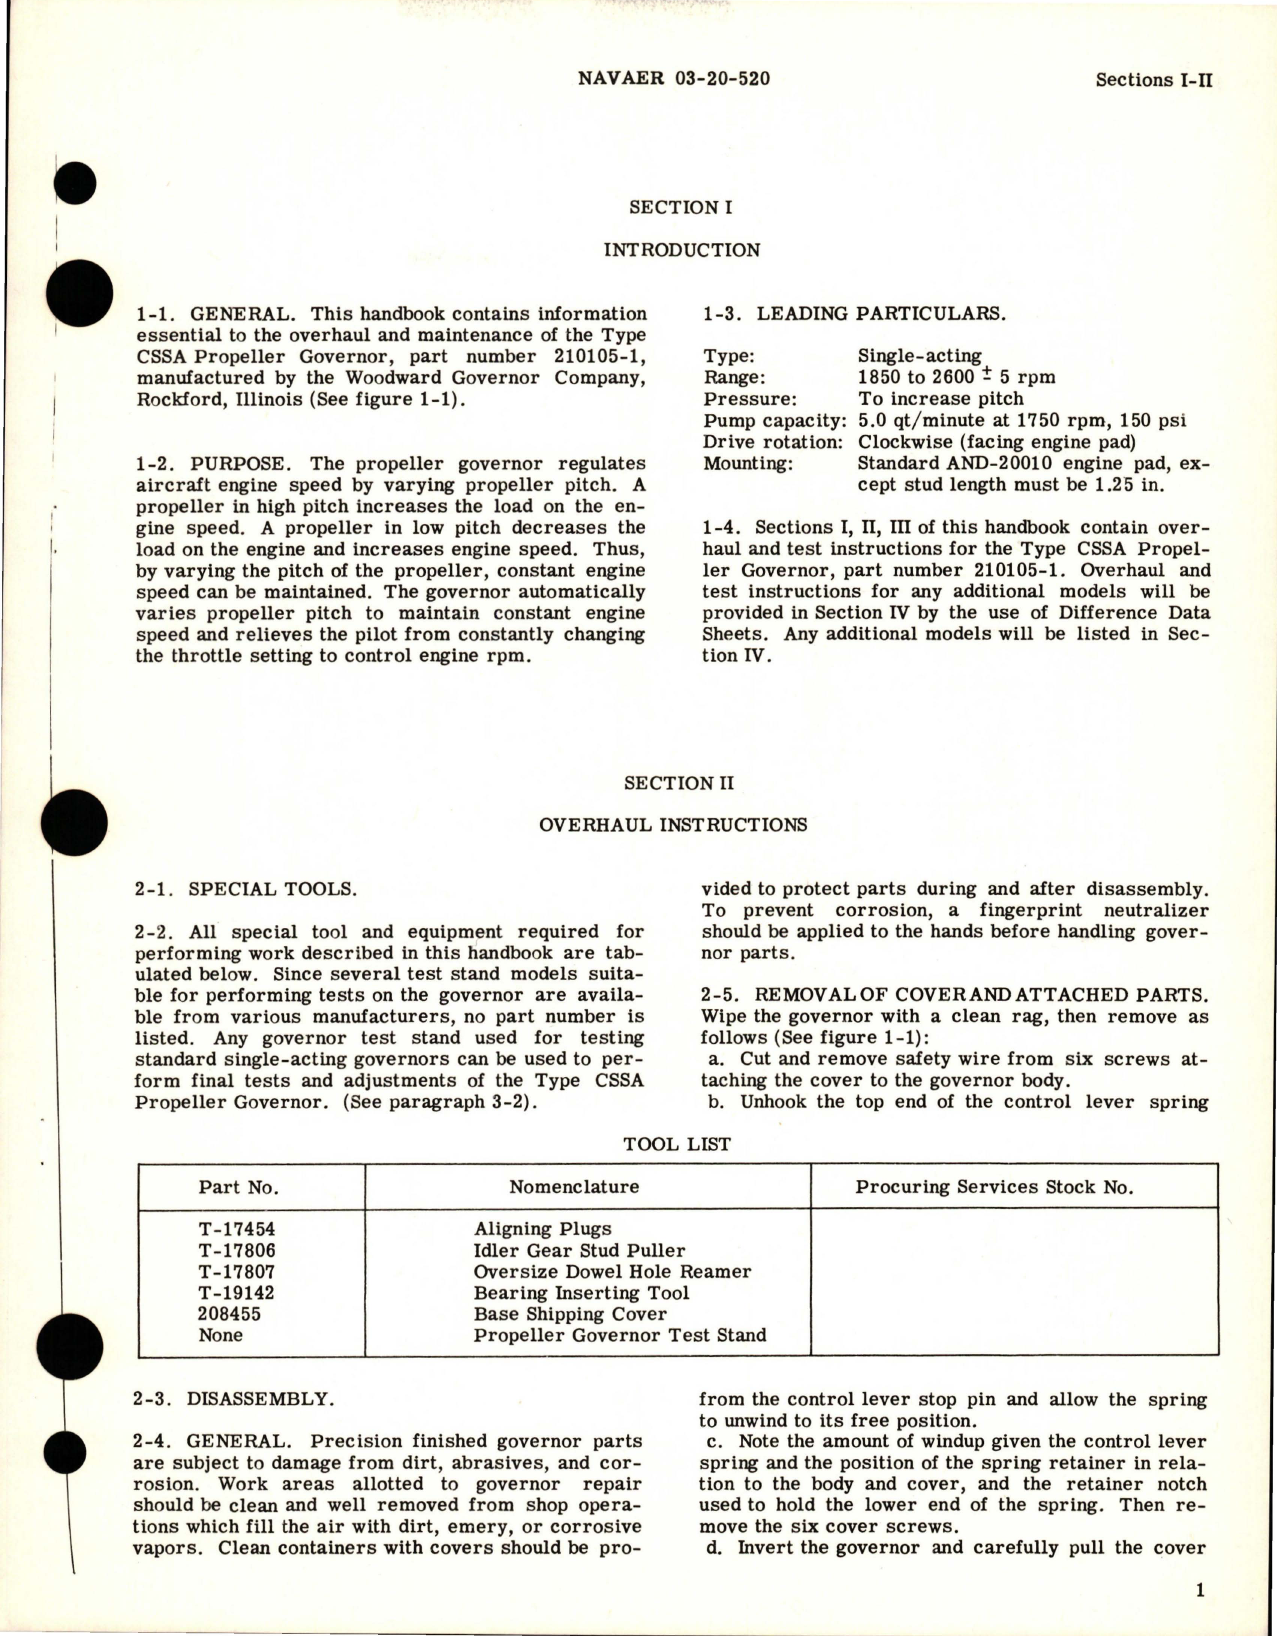 Sample page 5 from AirCorps Library document: Overhaul Instructions for Propeller Governor - Type CSSA - Part 210105-1